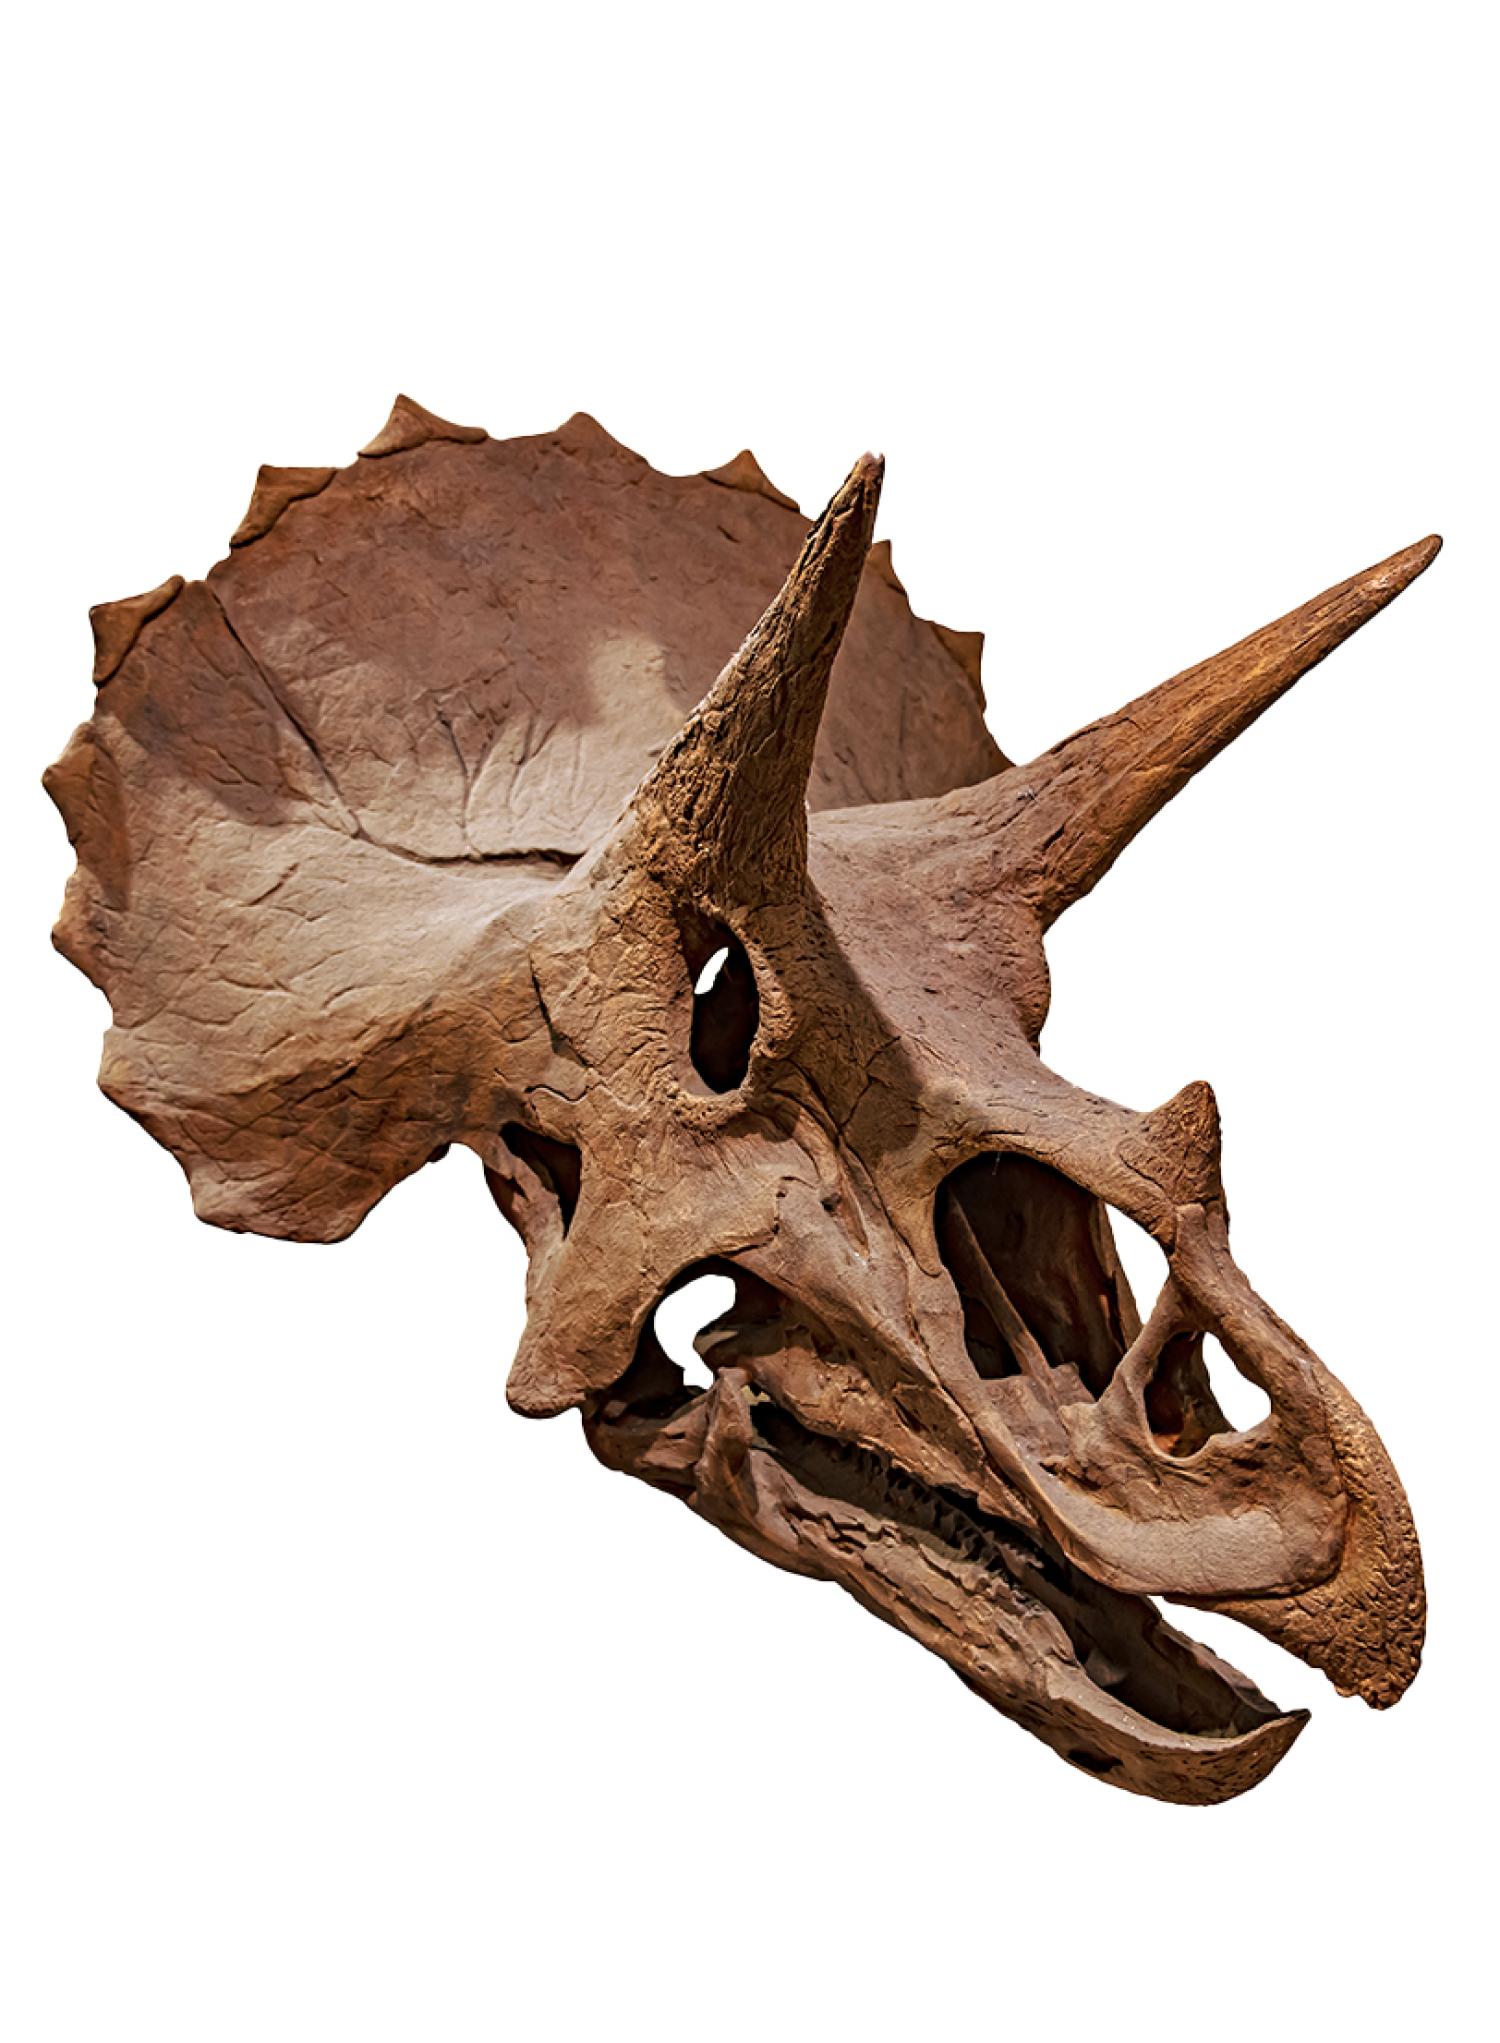 fossil skull of Triceratops on white background